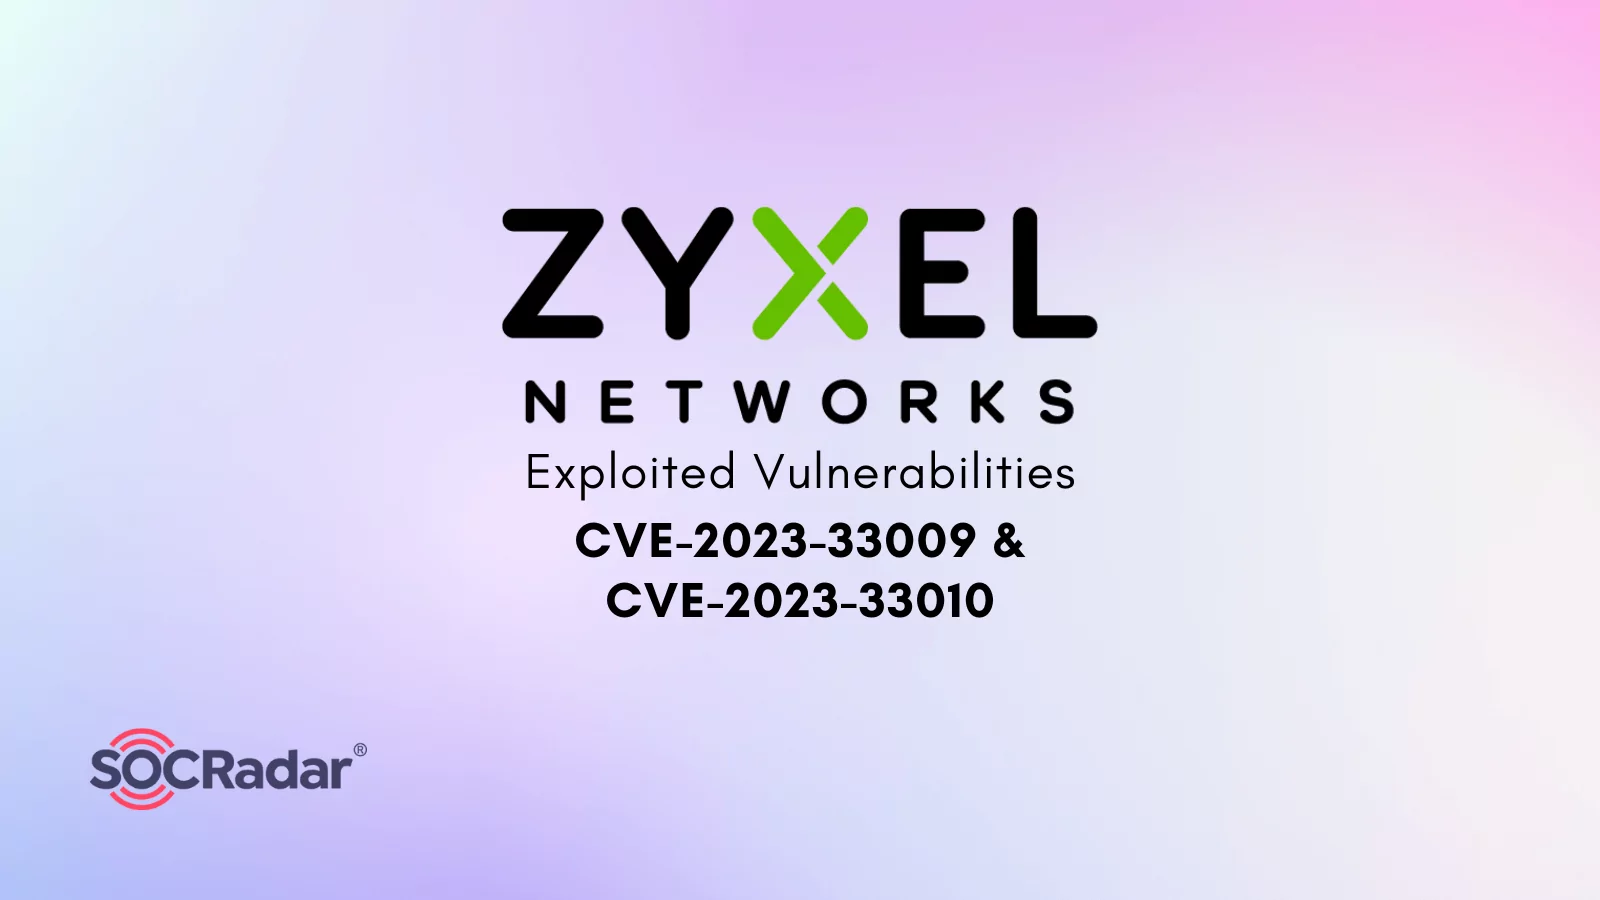 SOCRadar® Cyber Intelligence Inc. | Zyxel Firewall Flaws Exploited: Urgent Action Required